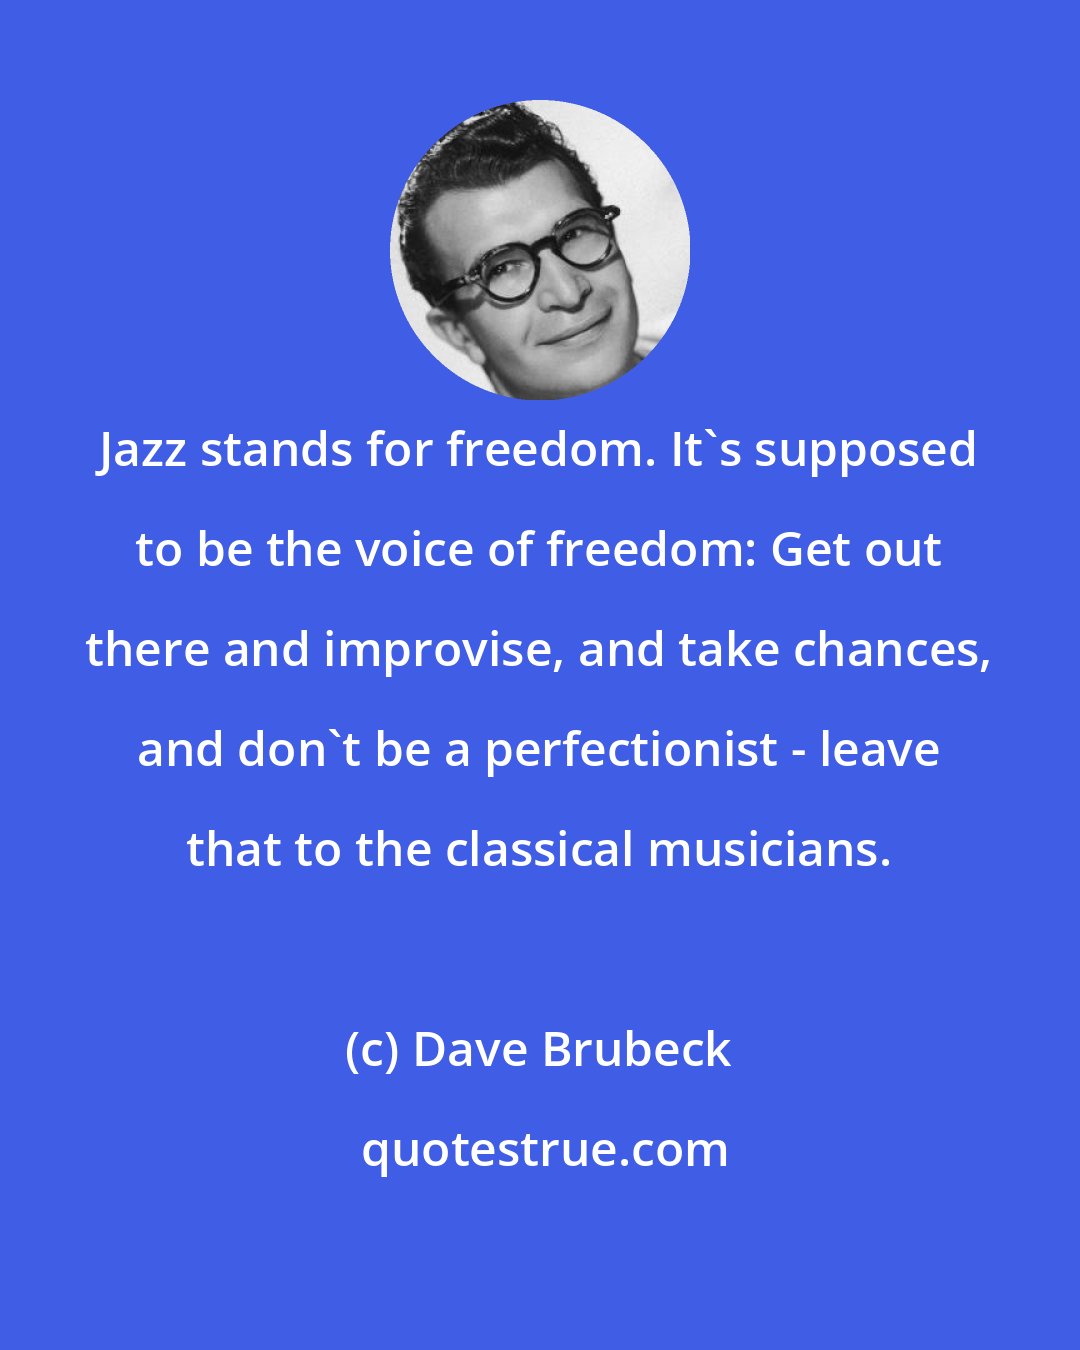 Dave Brubeck: Jazz stands for freedom. It's supposed to be the voice of freedom: Get out there and improvise, and take chances, and don't be a perfectionist - leave that to the classical musicians.